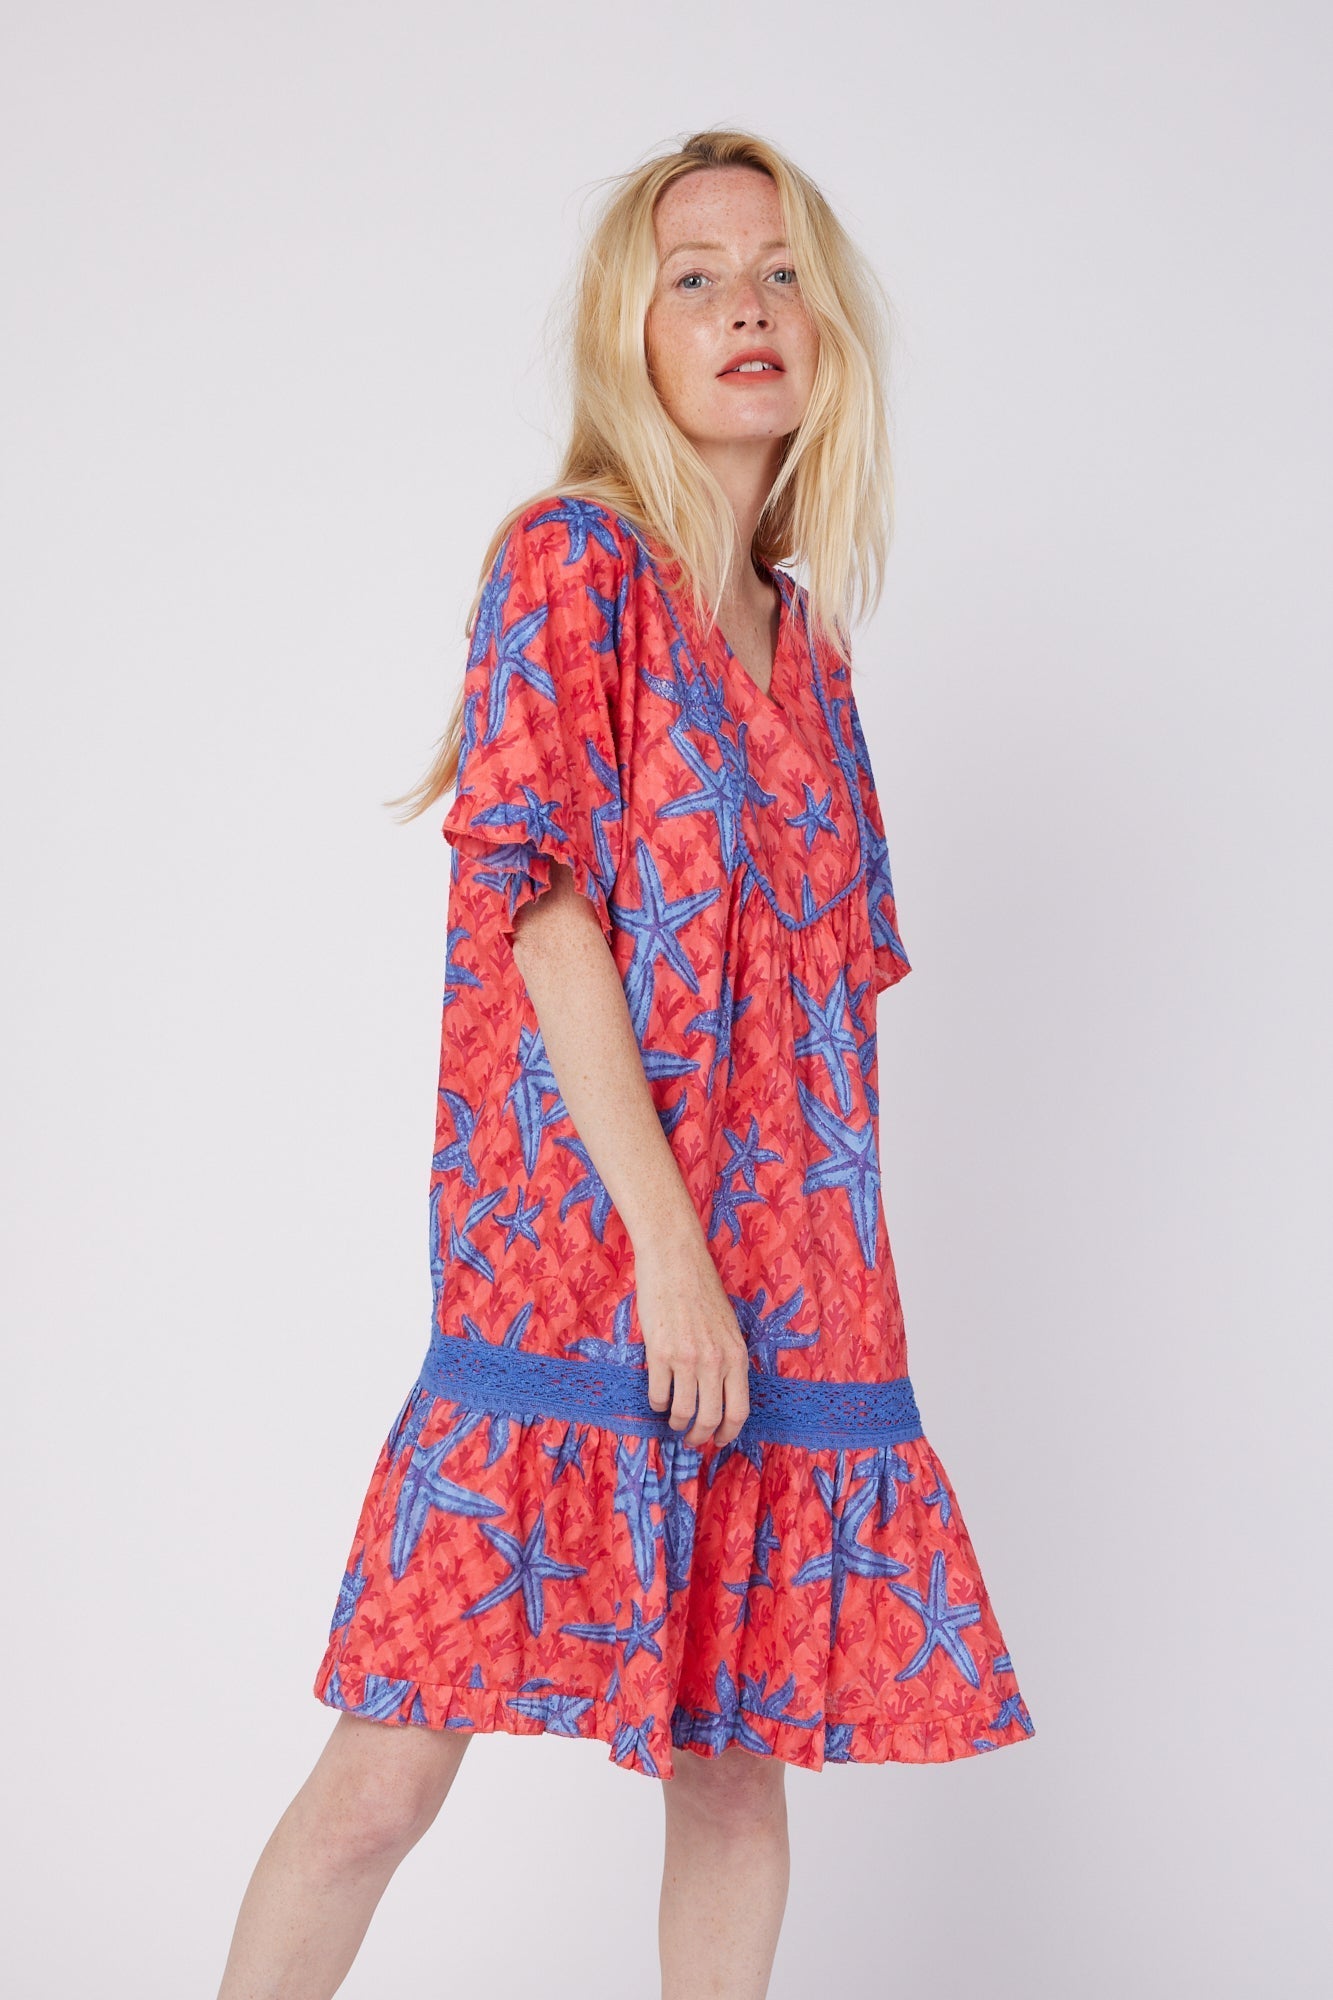 ModaPosa Ilaria Short Sleeve Drop Waist Hand Embroidered Knee Length Dress with Lace Trim in Starfish Scales . Discover women's resort dresses and lifestyle clothing inspired by the Mediterranean. Free worldwide shipping available!